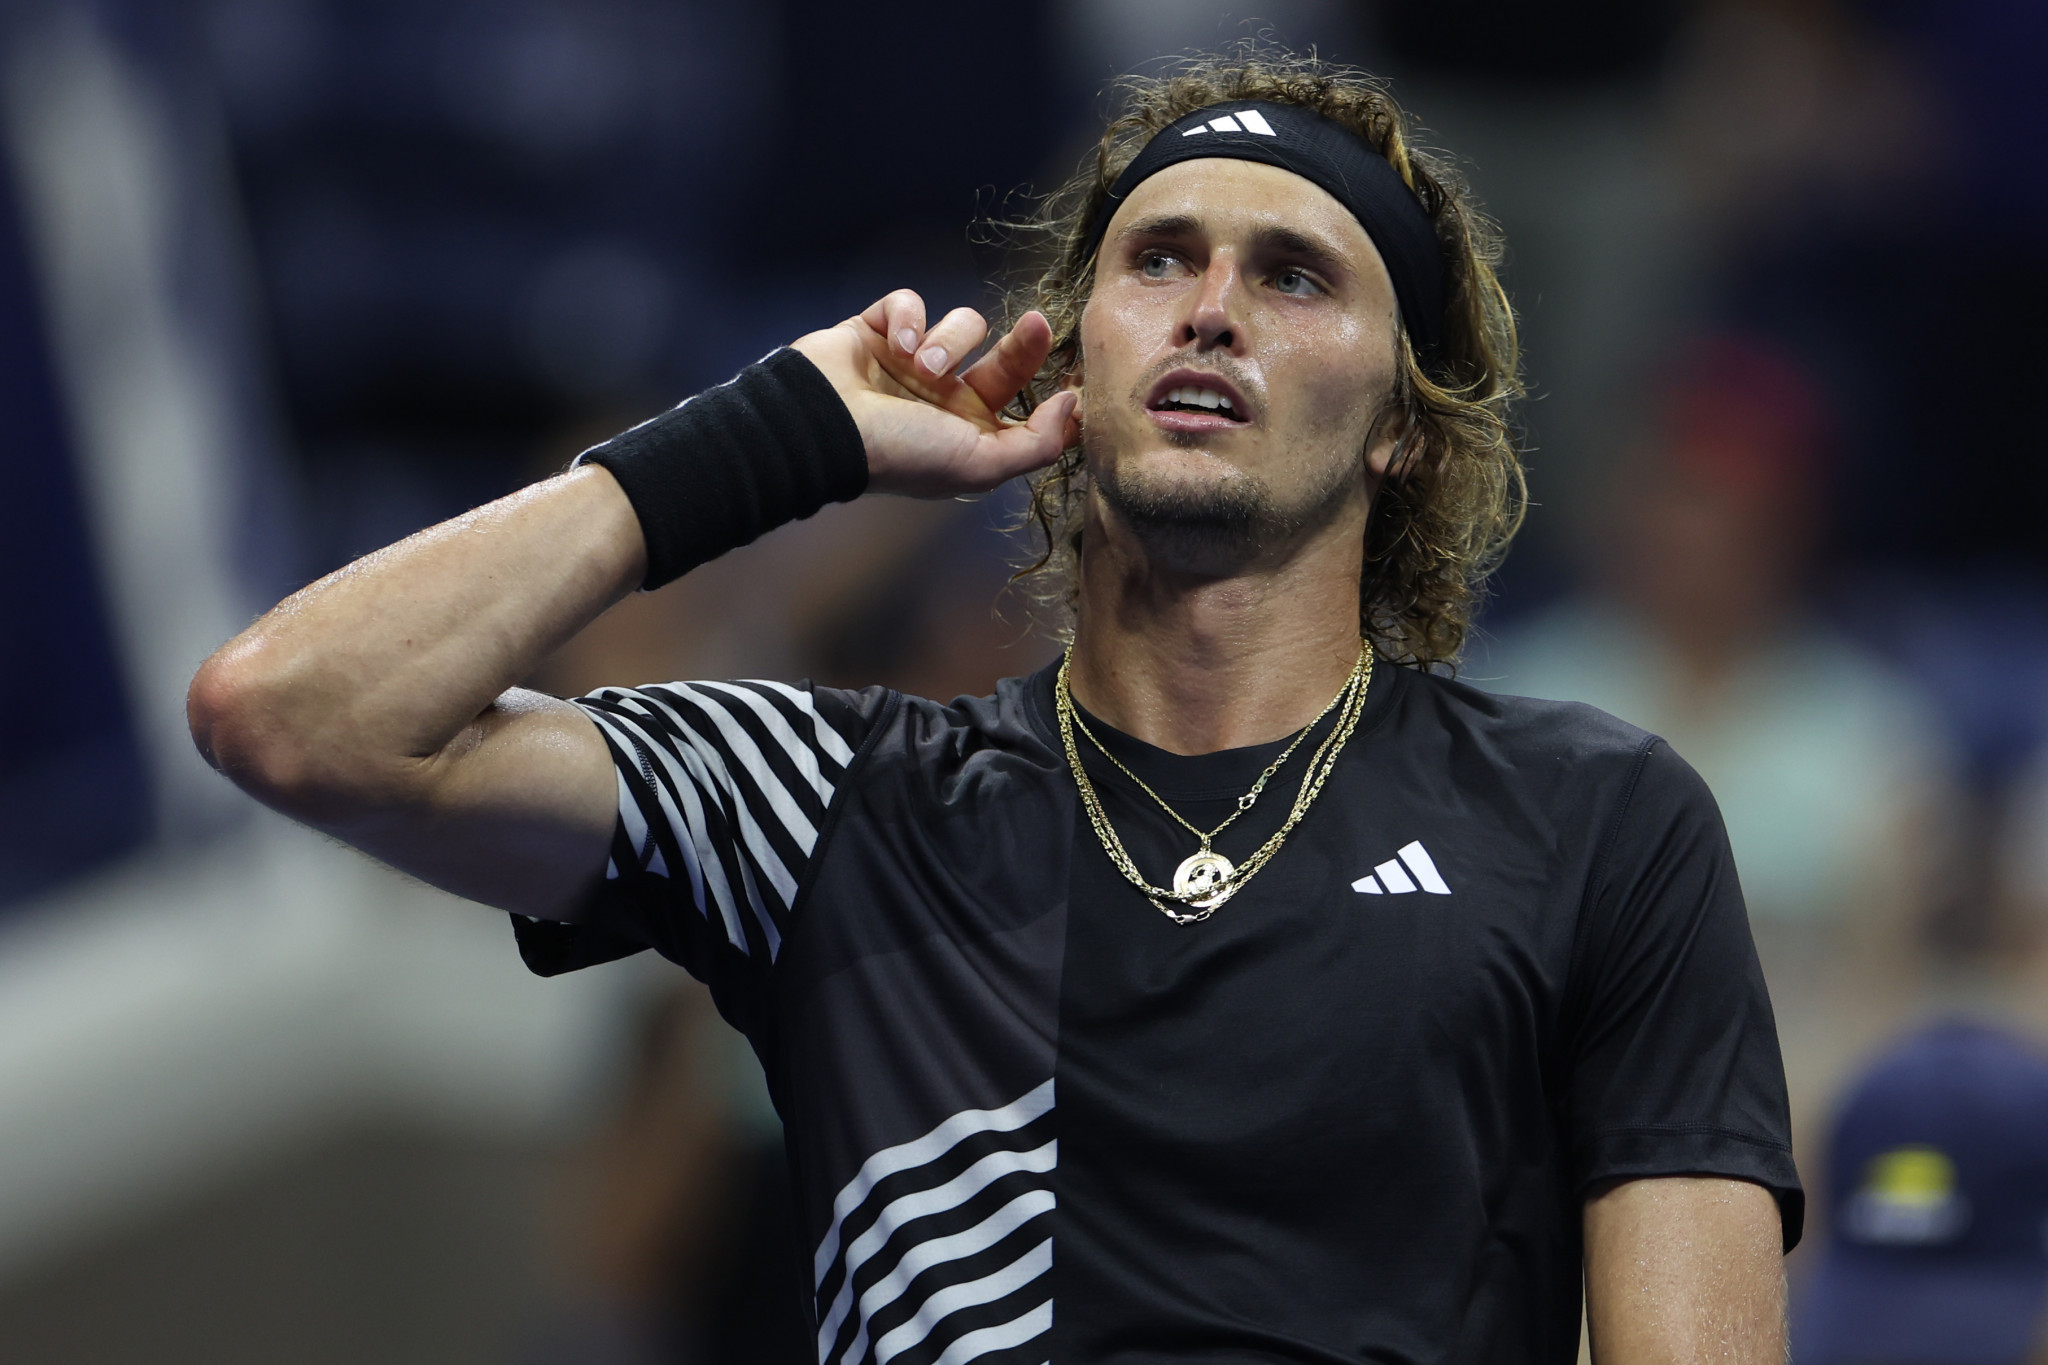  Alexander Zverev's intense five-set win over Italy's Jannik Sinner at the US Open was marred by a fan shouting "the most famous Hitler phrase" ©Getty Images